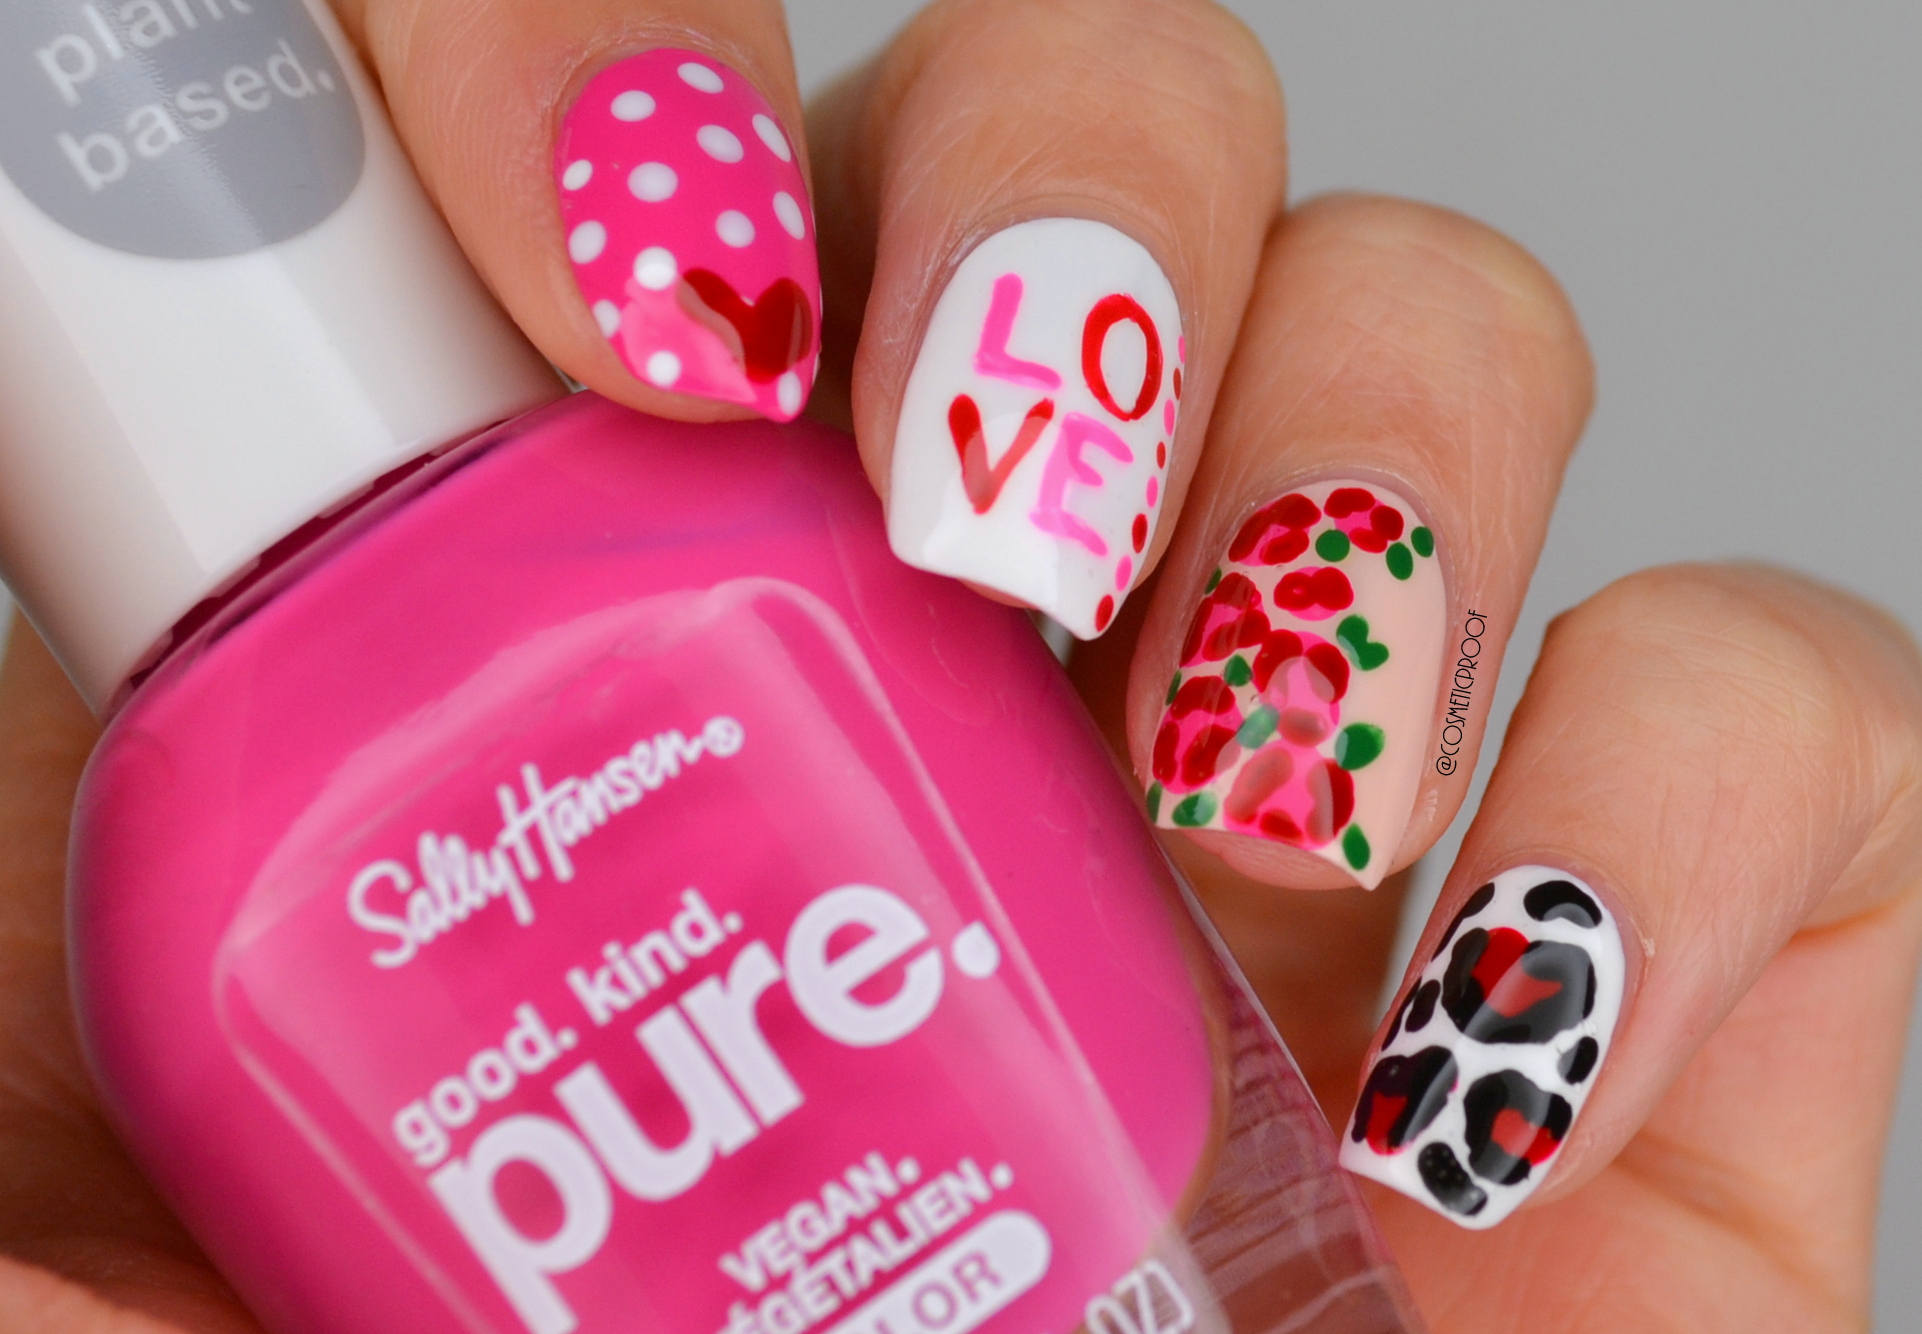 4. "Nail Art Tutorial for Valentine's Day" - wide 6